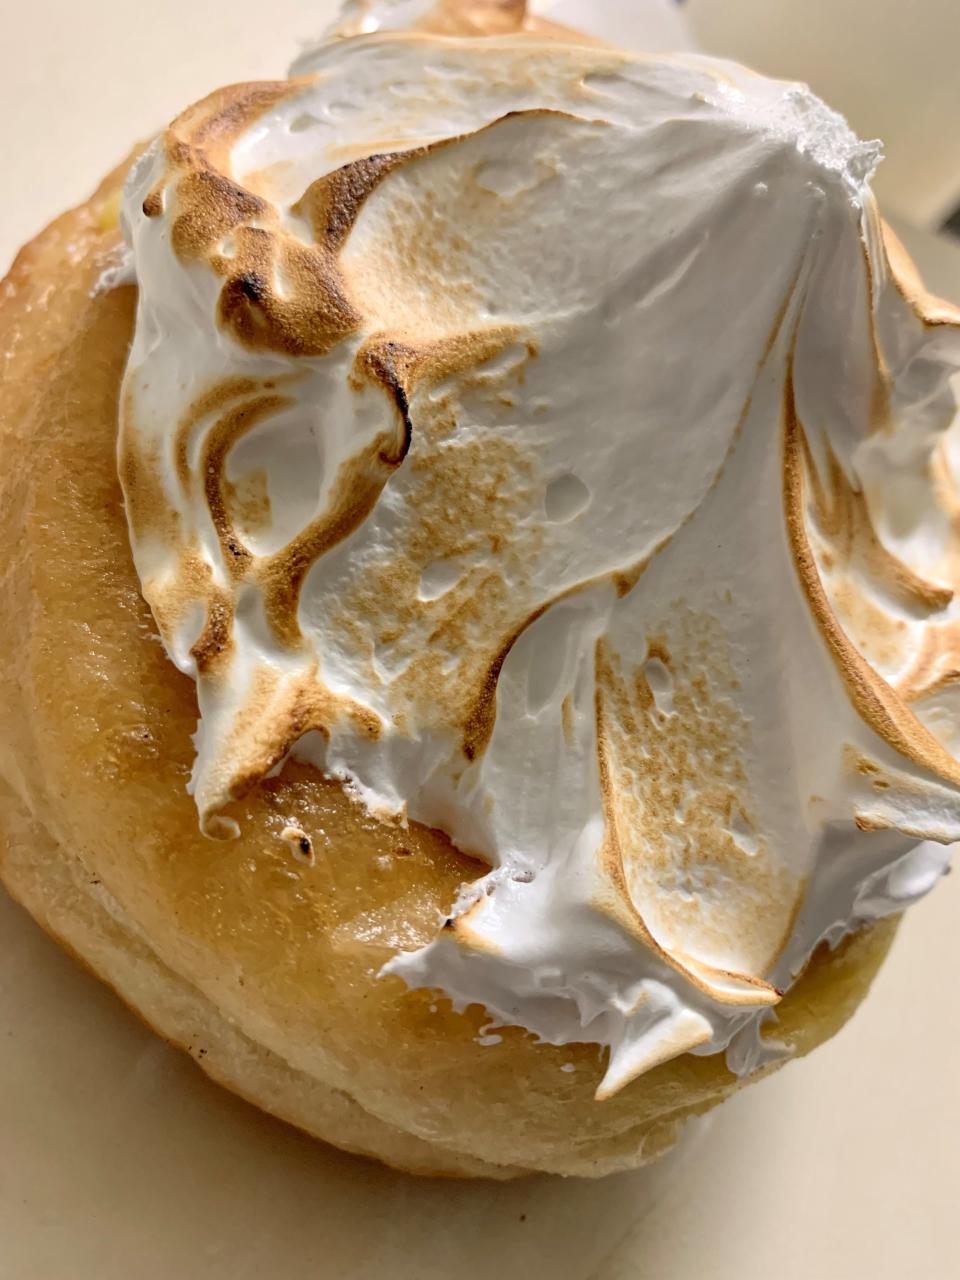 The lemon merengue doughnut at Cypress Table in Cocoa Village is a combination of soft, unsweetened doughnut topped by lemon custard and a twisting, pointy mountain of torched, soft meringue.